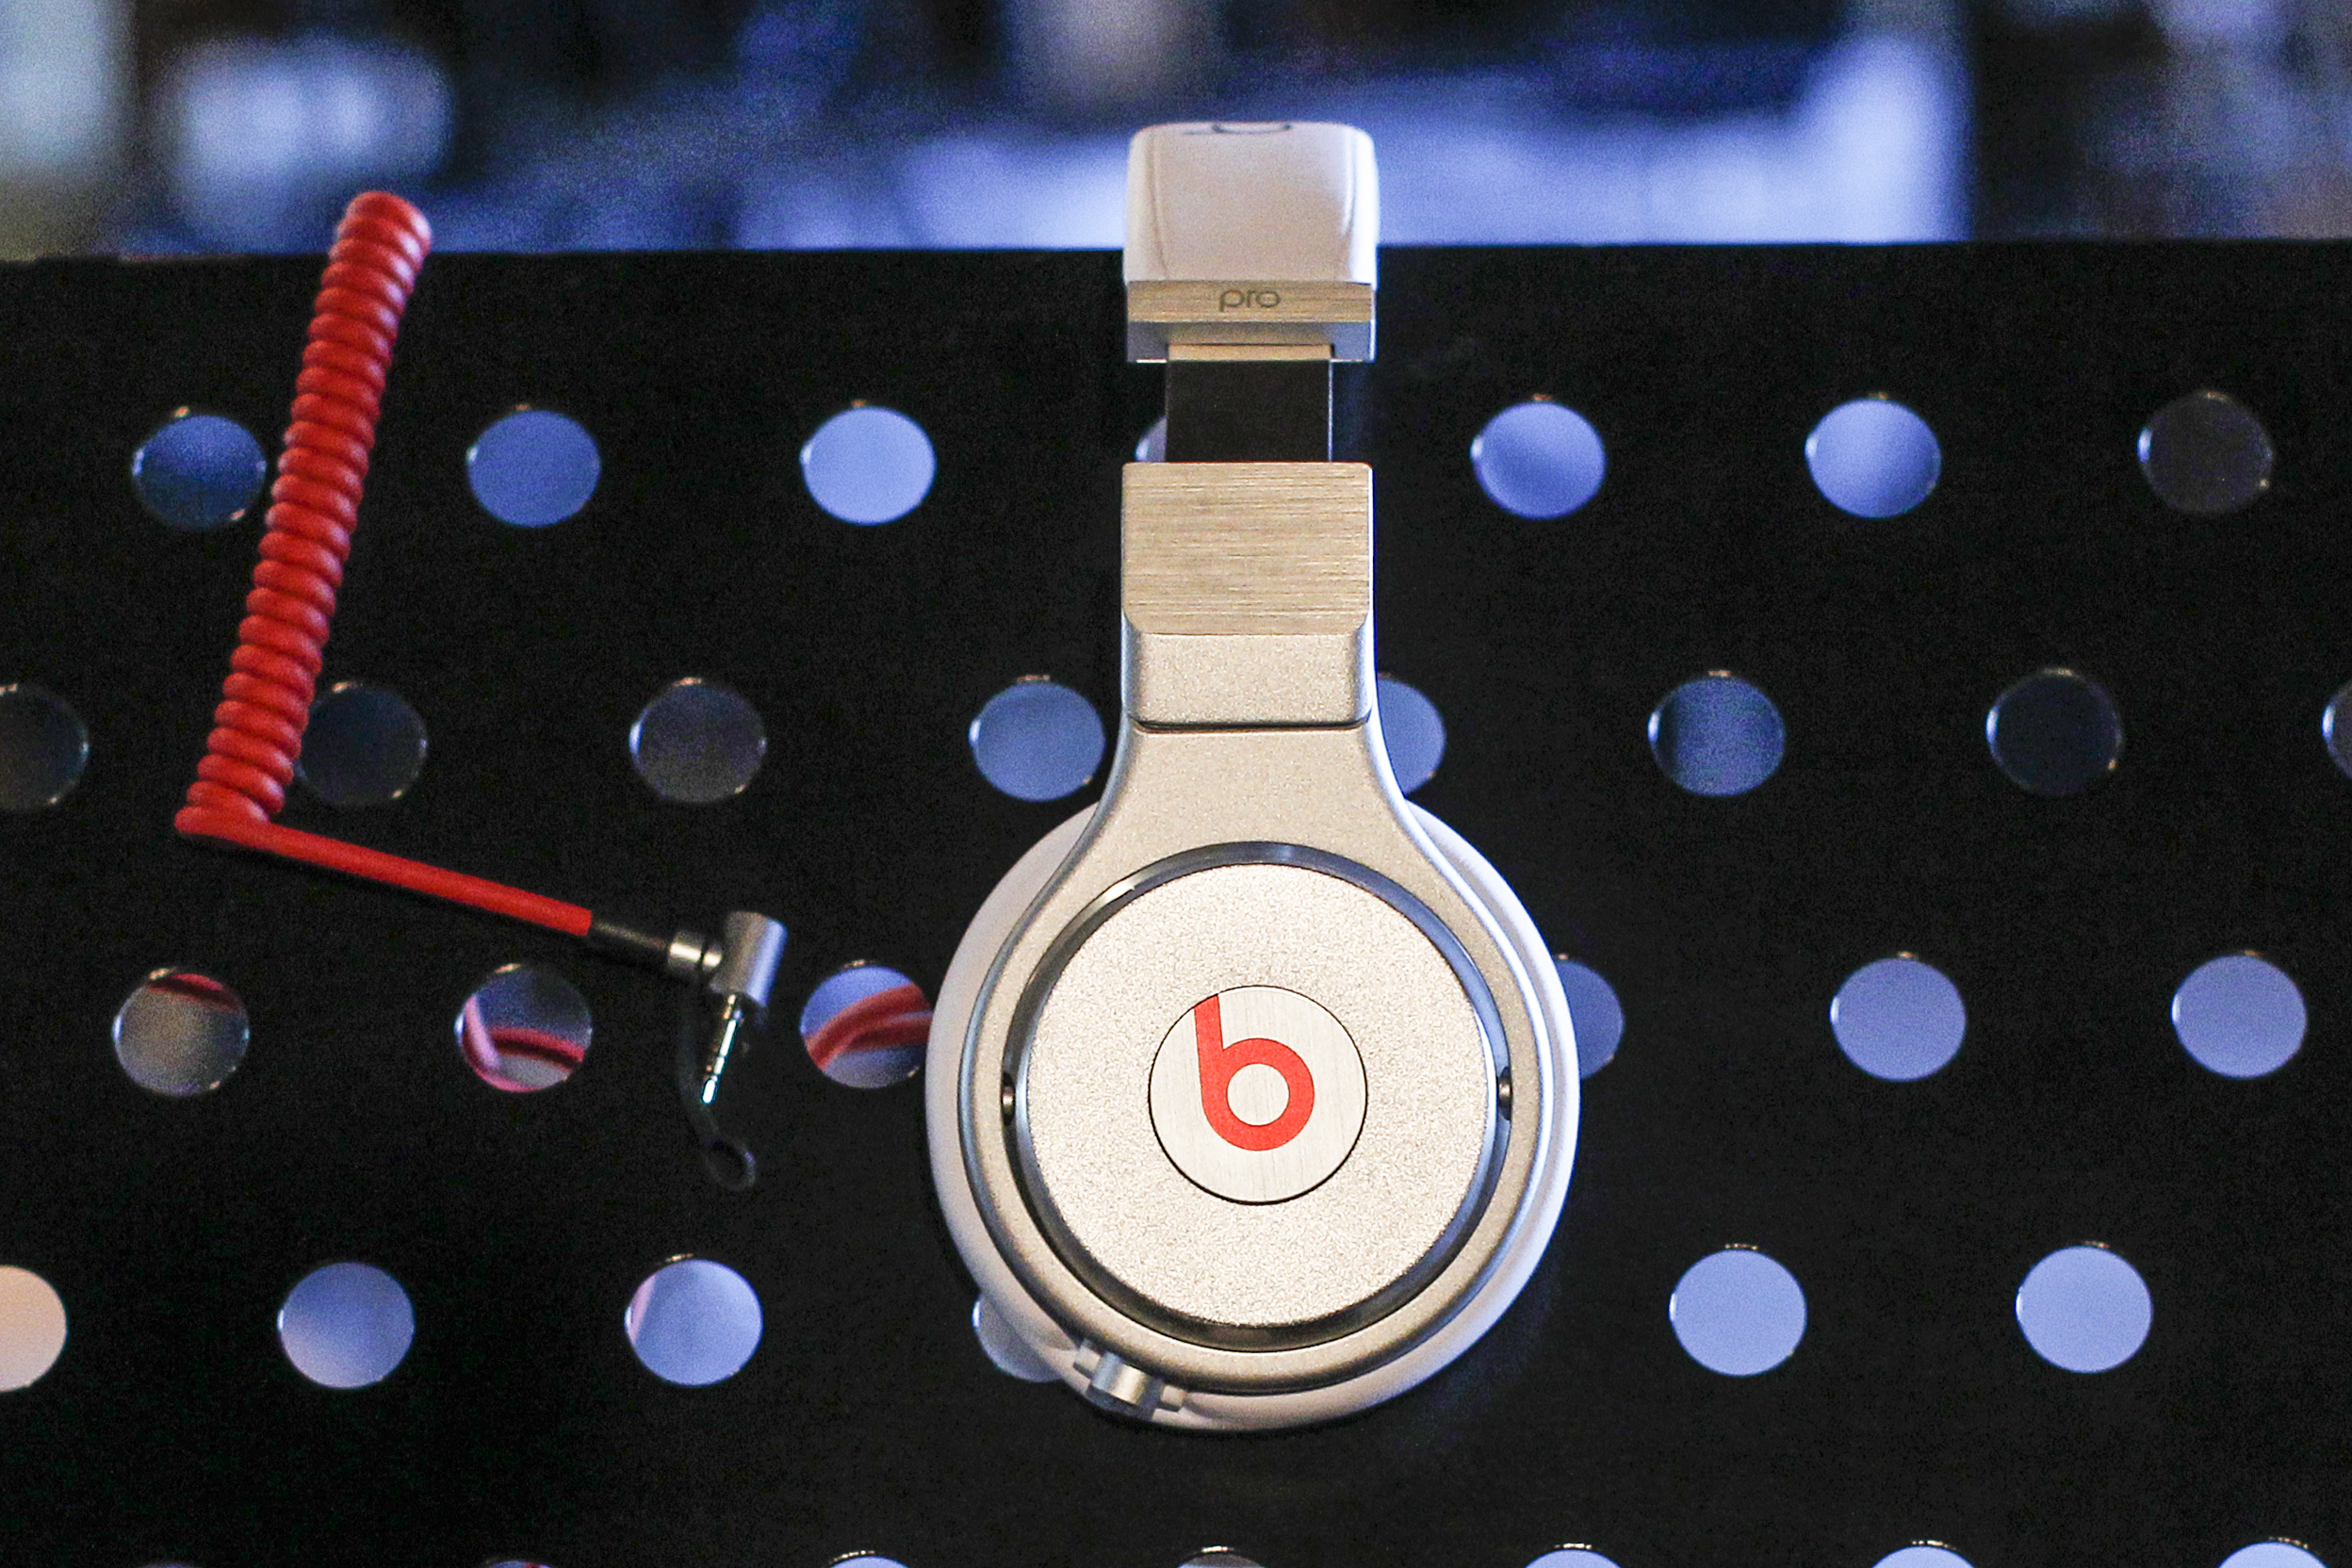 beats by dre value